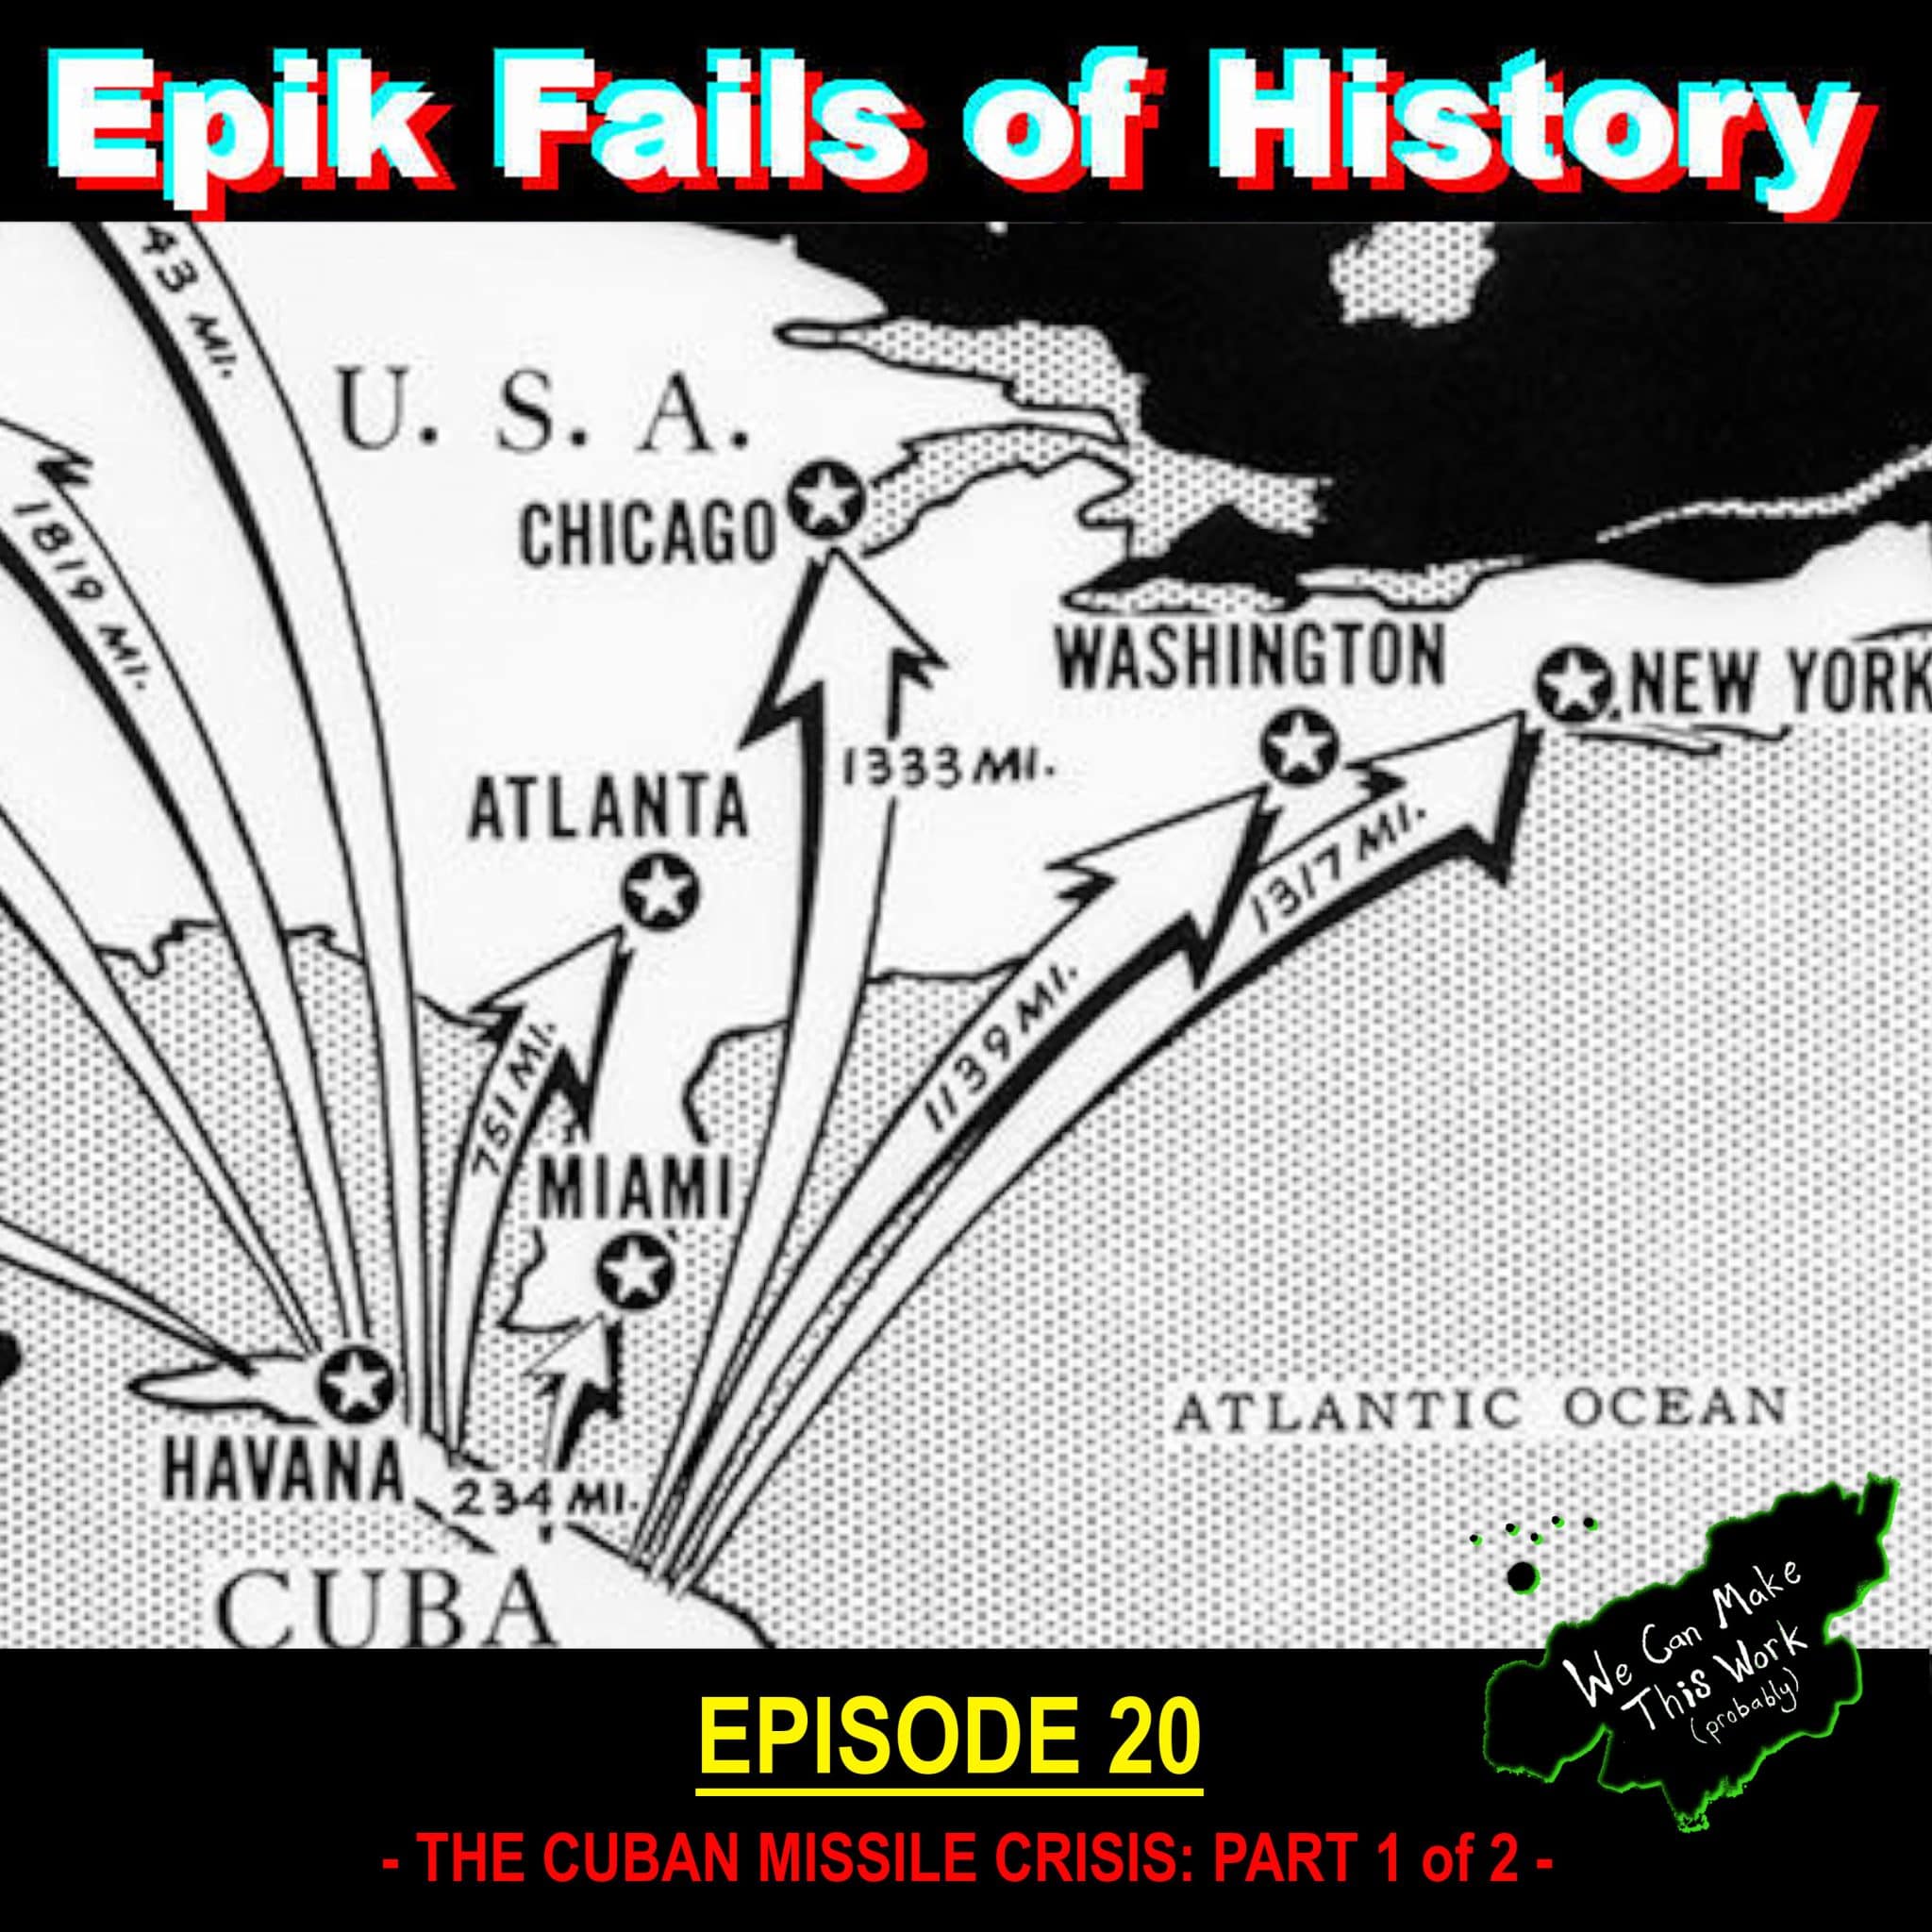 E20 - THE CUBAN MISSILE CRISIS: Cold War on Defrost (Part 1 of 2)